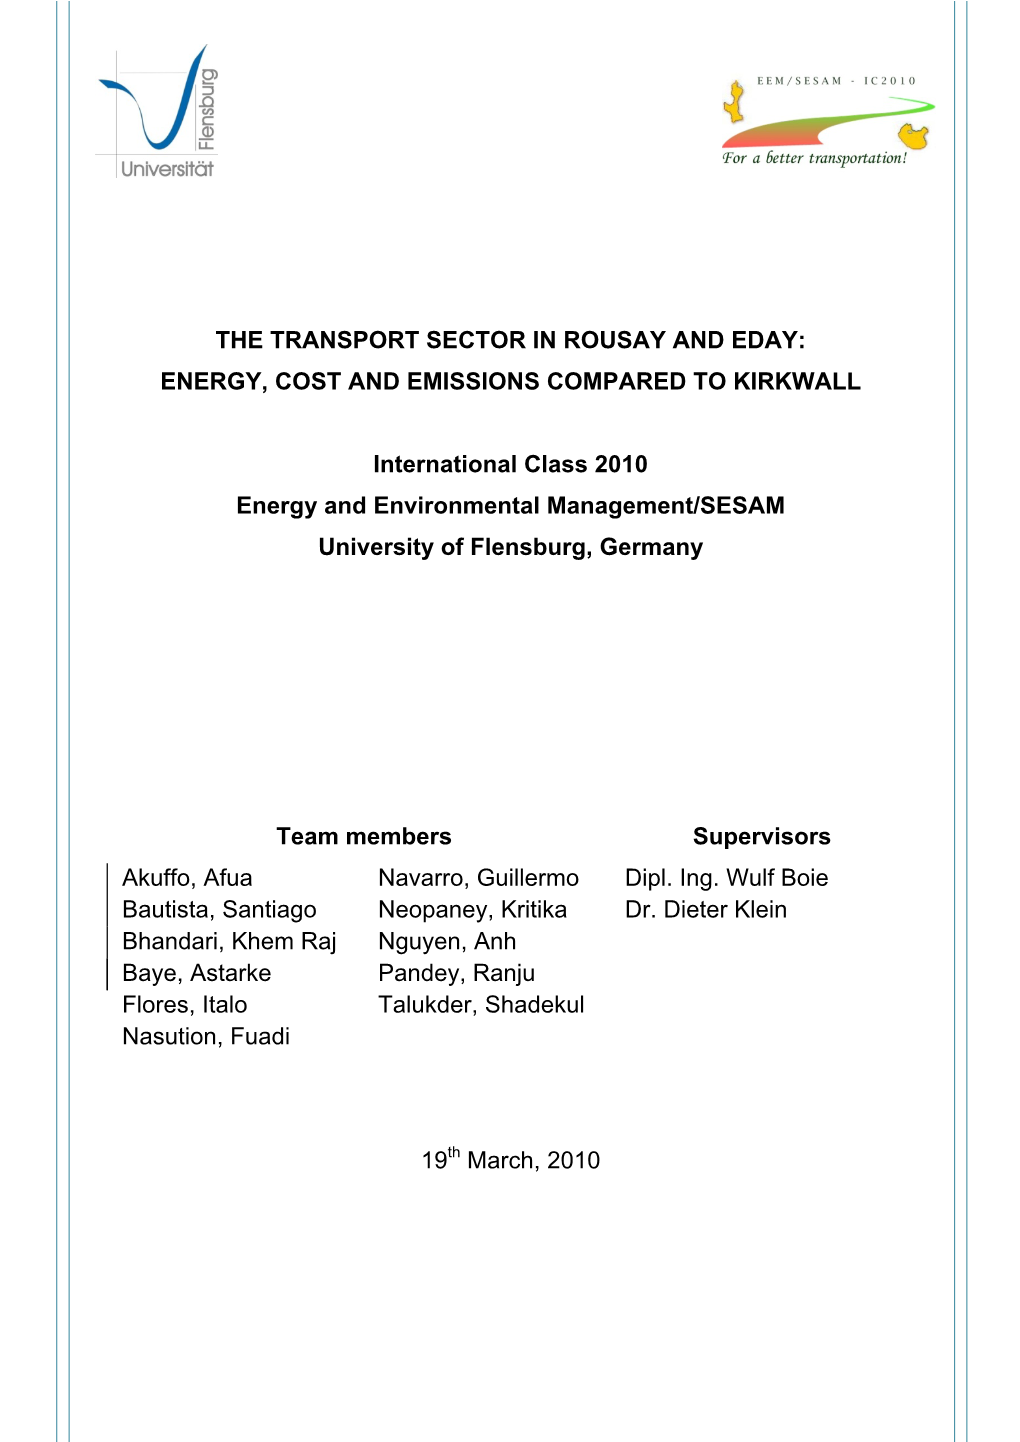 The Transport Sector in Rousay and Eday: Energy, Cost and Emissions Compared to Kirkwall